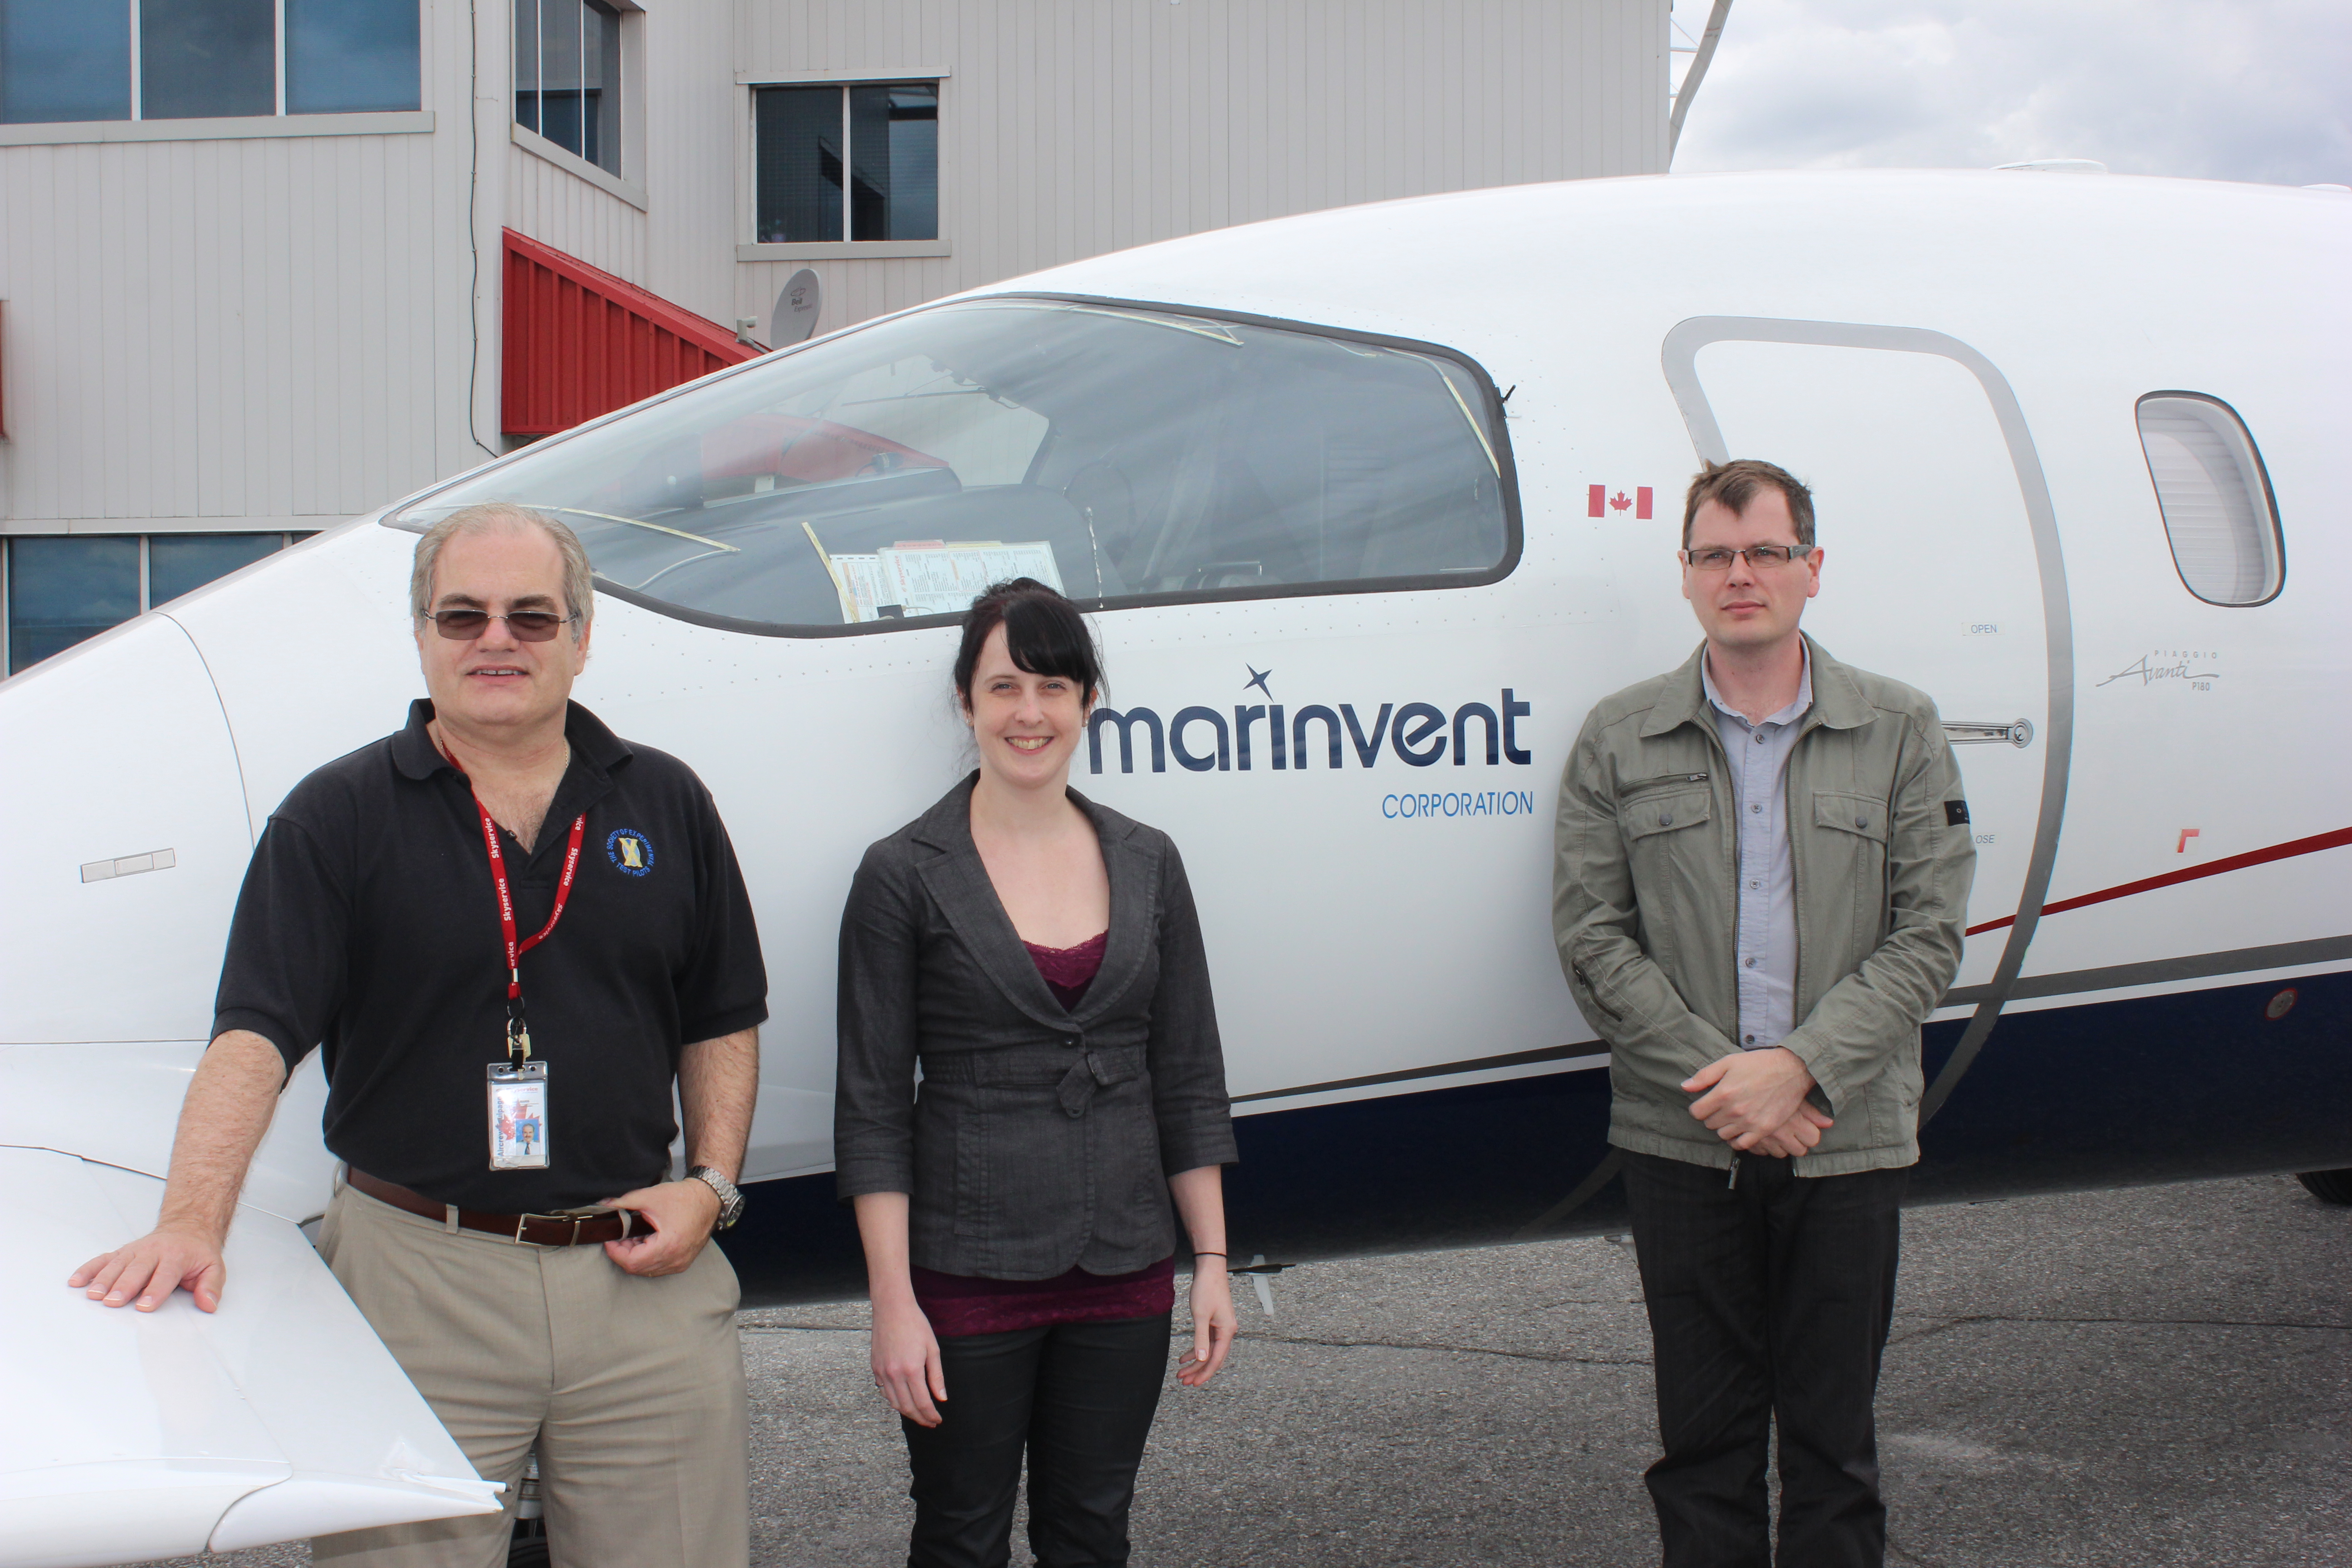 Maris and his team in front of the company's signature Plaggio, P-180  Avanti avionics test bed aircraft